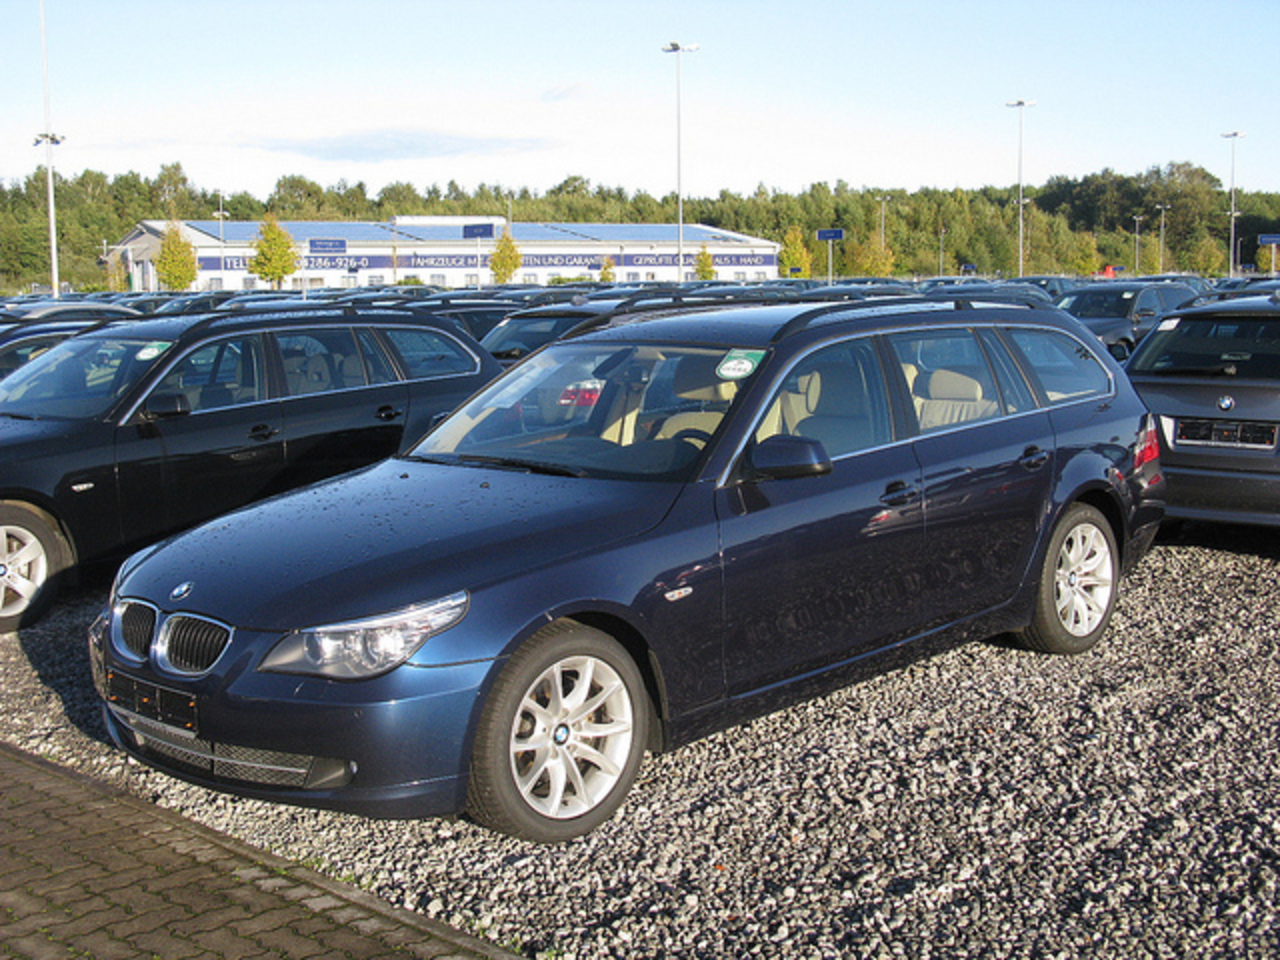 BMW 520d Touring E61 | Flickr - Photo Sharing!